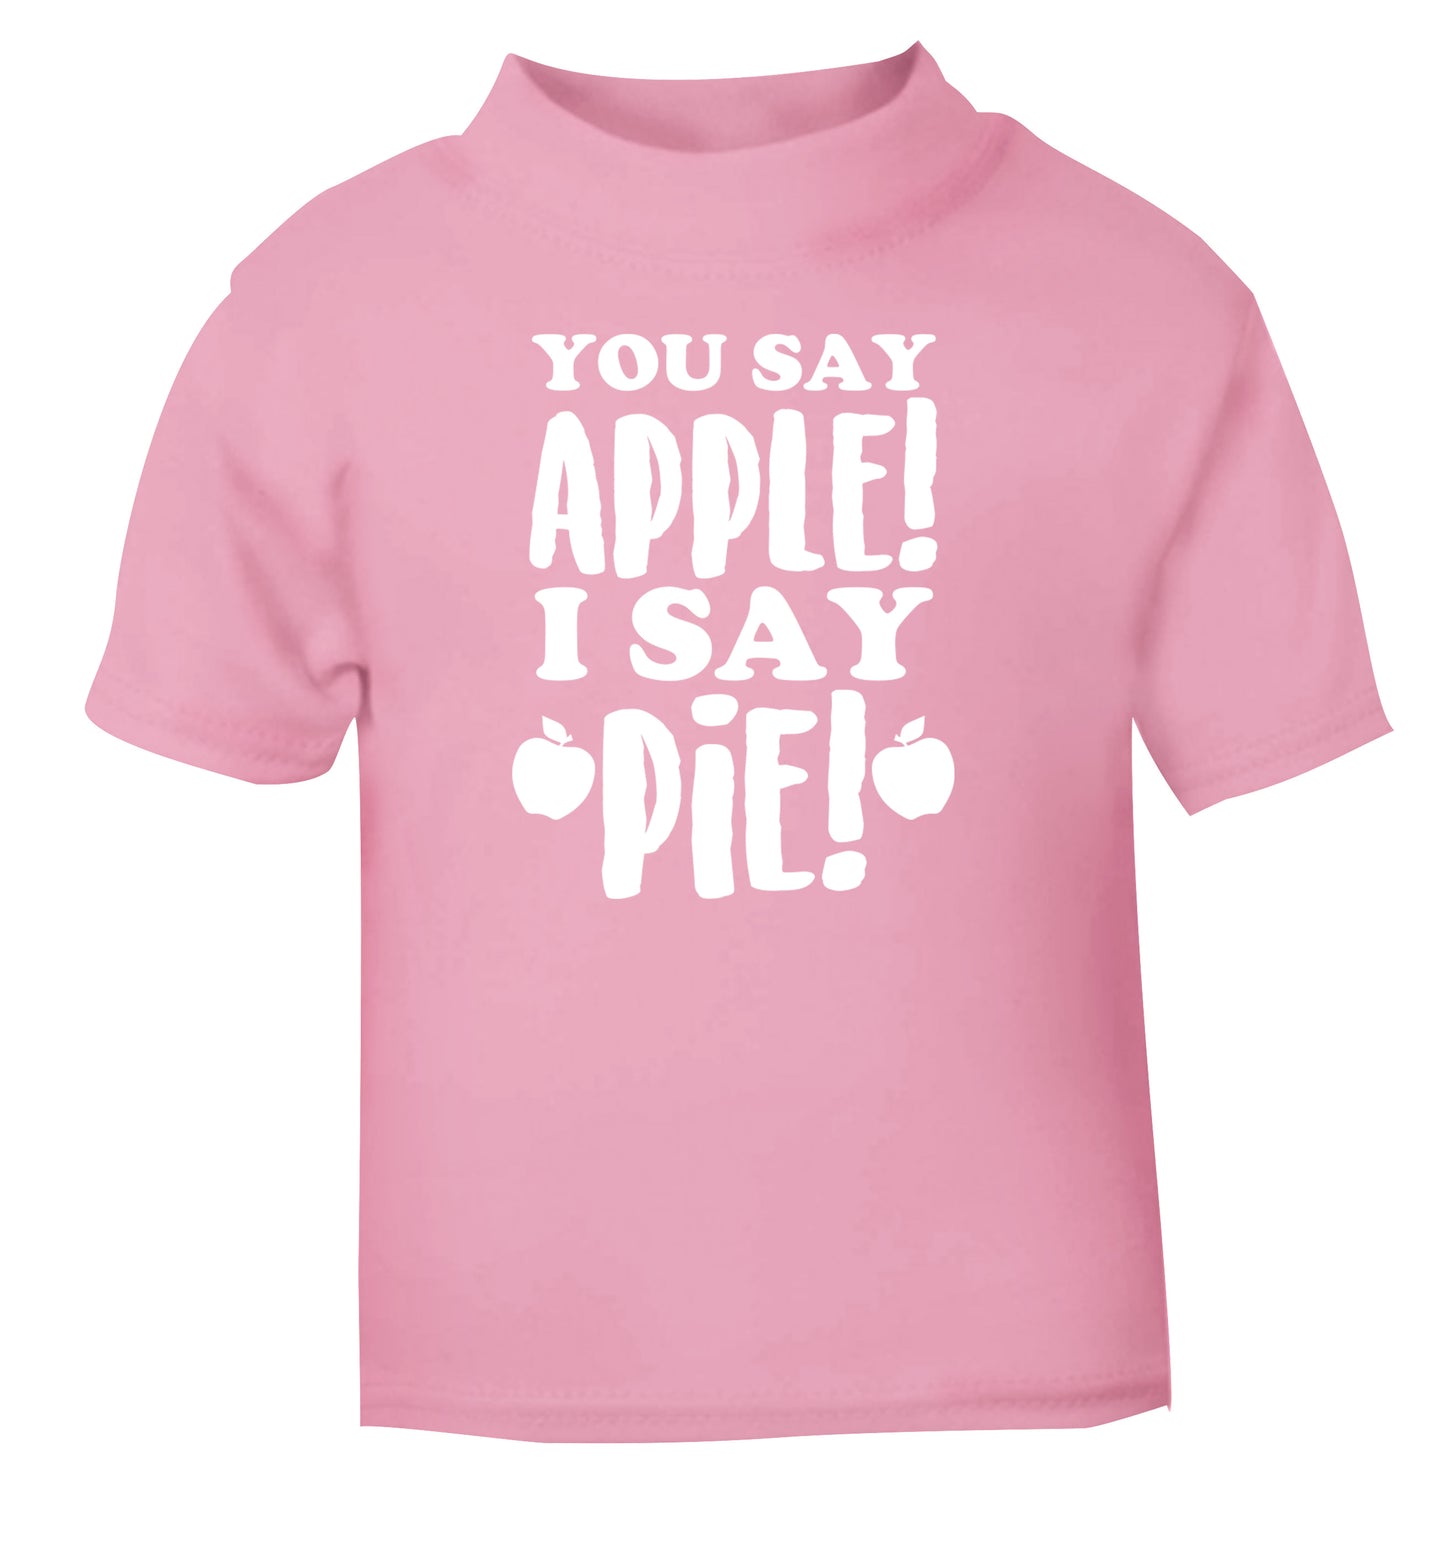 You say apple I say pie! light pink Baby Toddler Tshirt 2 Years